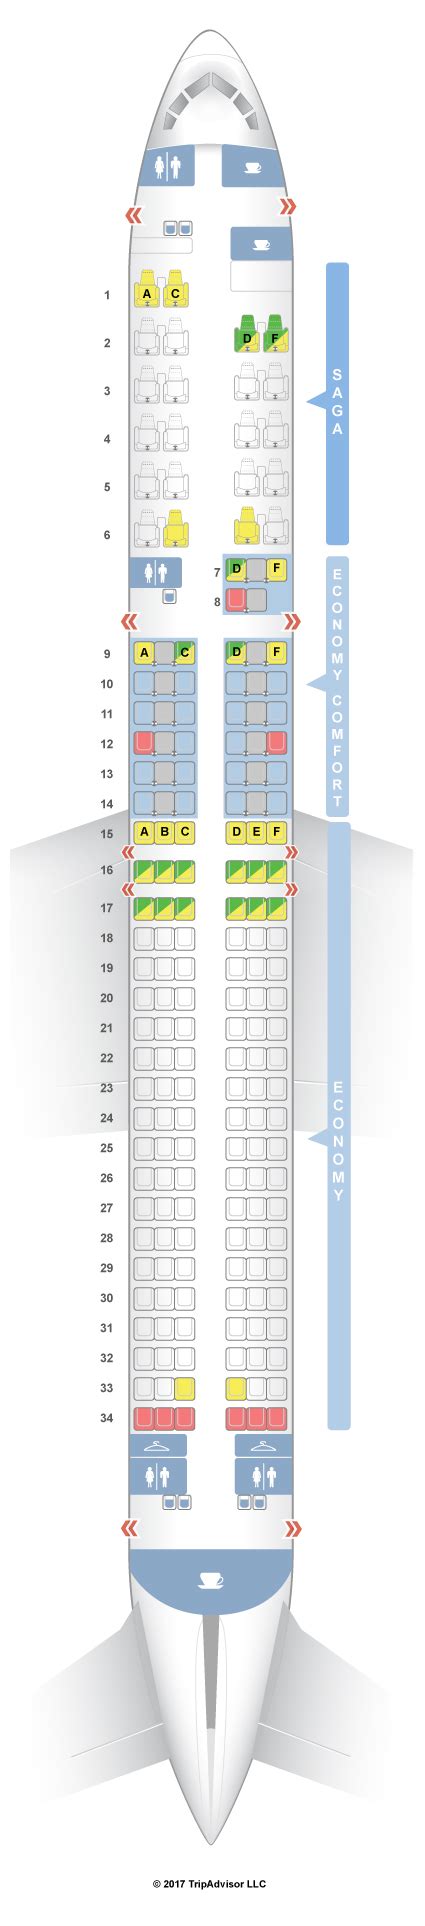 Seat 2D on Icelandair Boeing 757-200 (75W) Add a Review Add a Photo 5 / 5.0 with 1 review... Home; Airlines; Icelandair ... · Boeing 757-300 · Boeing 767-300ER . Icelandair Boeing 757-200 Seat Reviews Show seat chart [1] Pro tips: no seat reclining in front of you : no seat reclining in front of you : this seat may have extra legroom : no ...